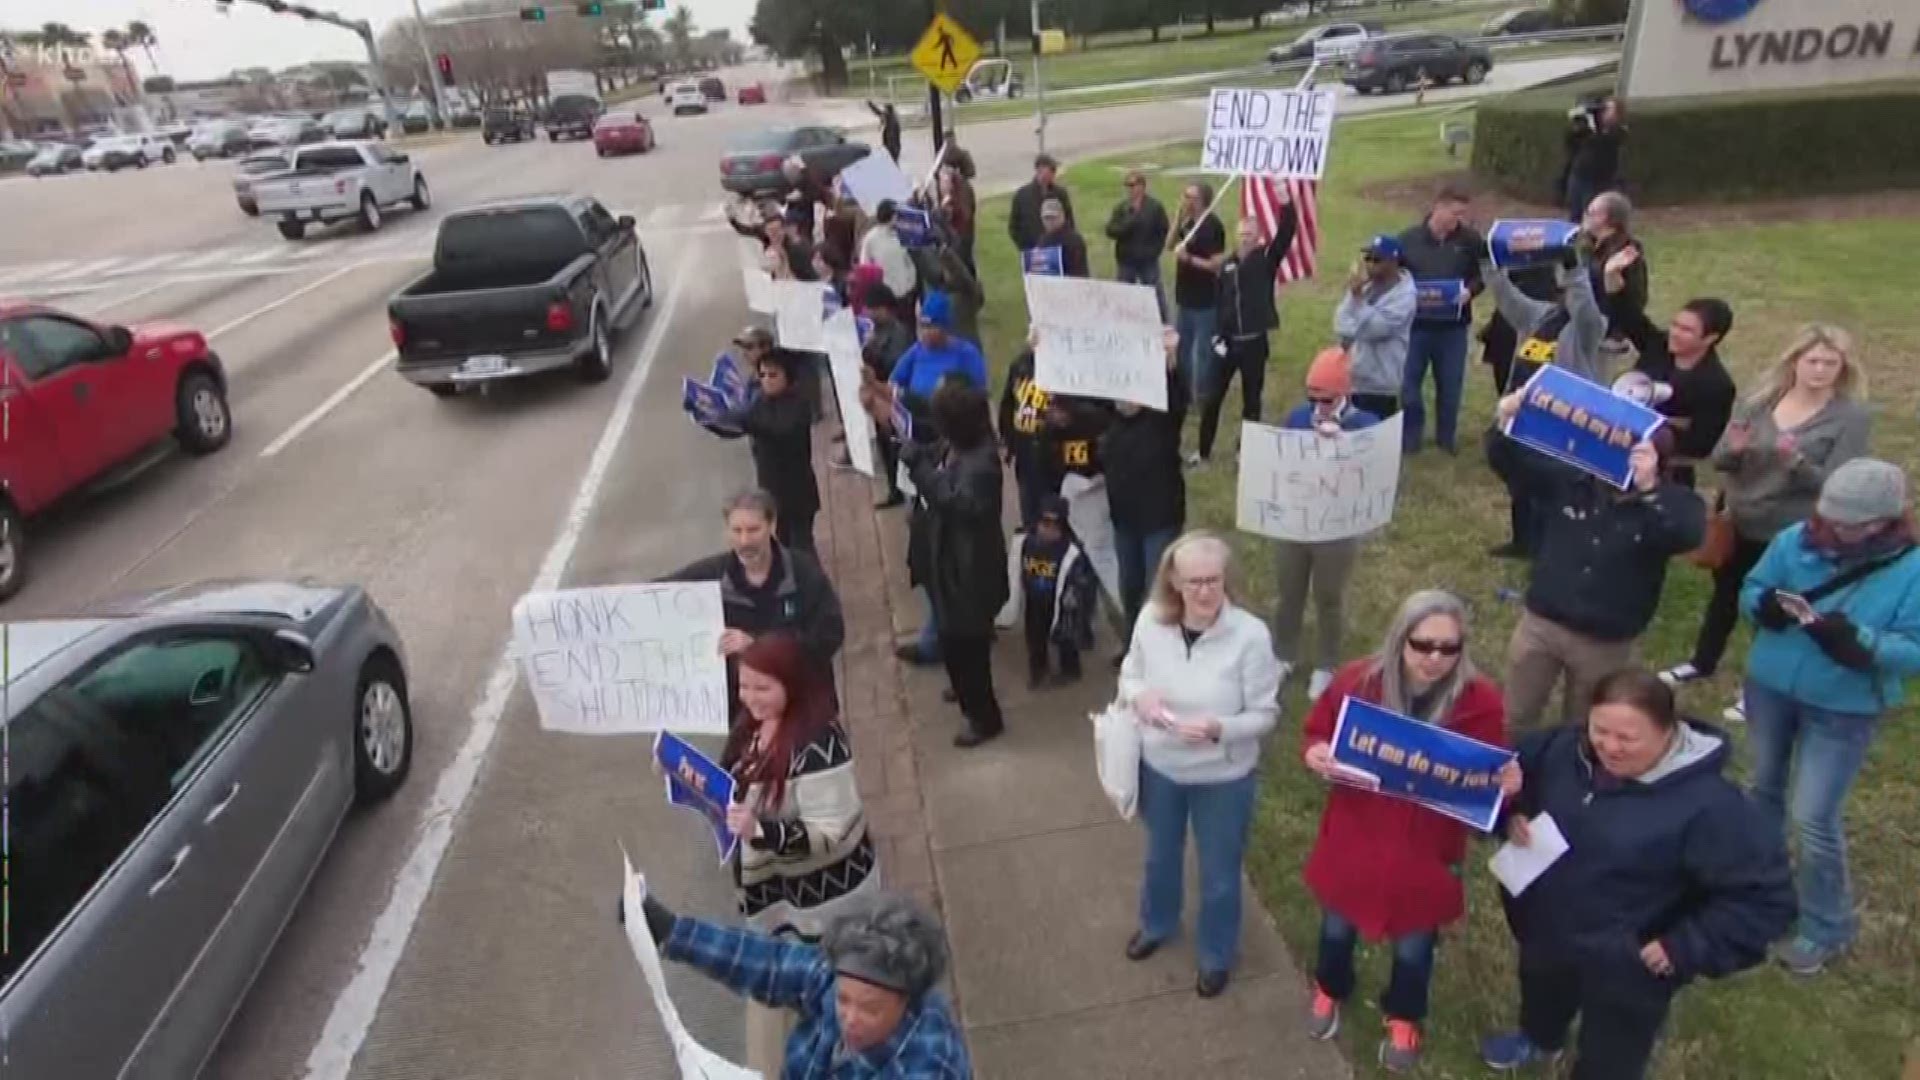 Employees who work for NASA and TSA rallied outside the Johnson Space Center on Tuesday in protest of the ongoing government shutdown.